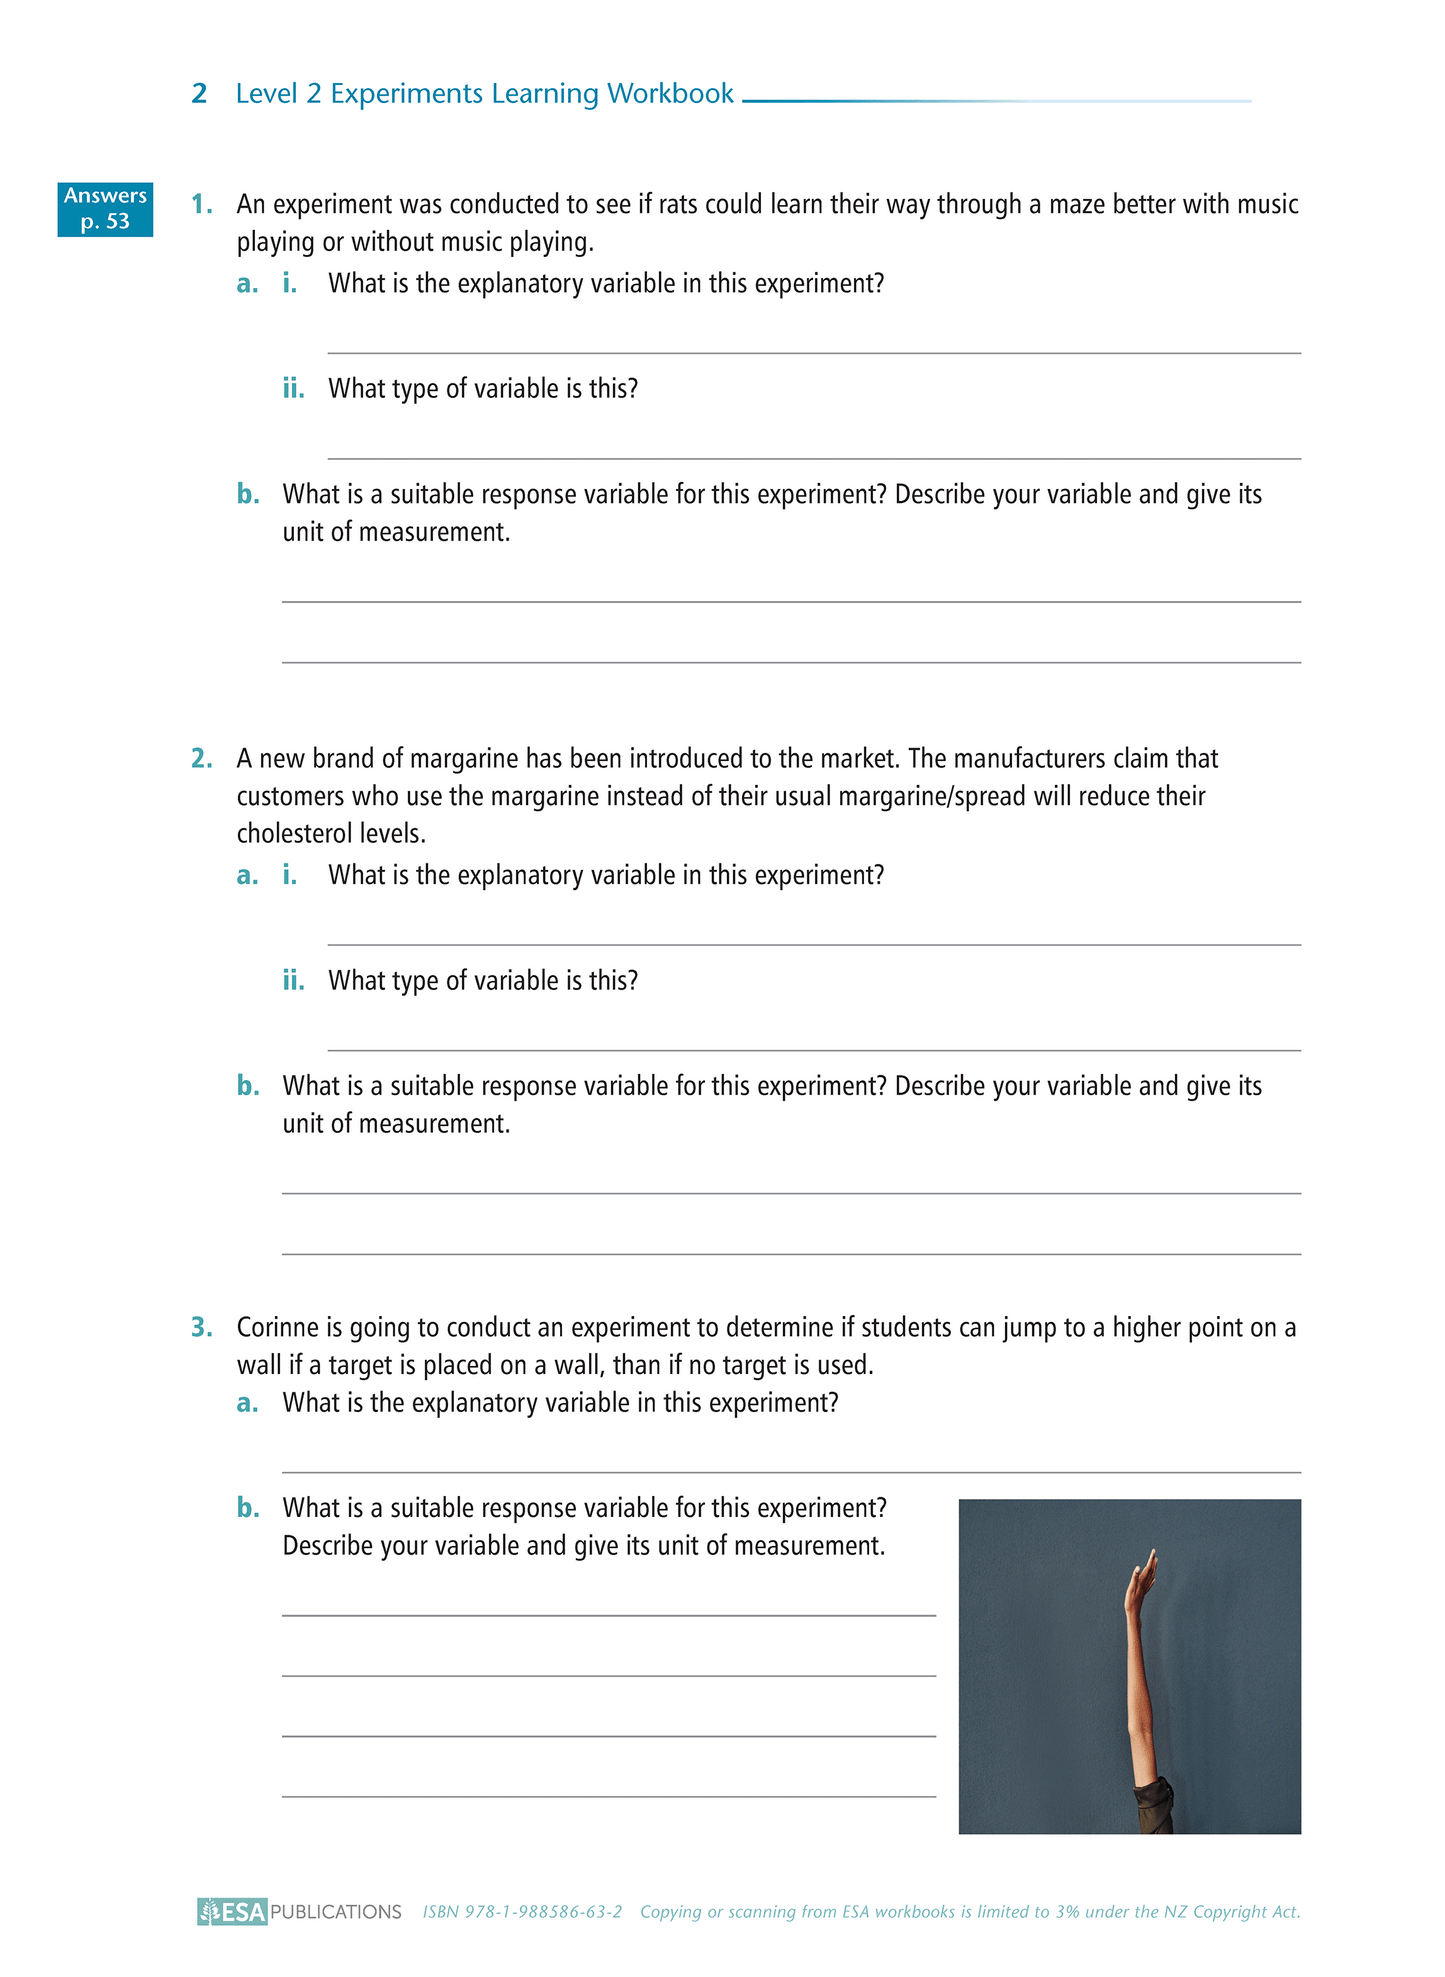 Level 2 Experiments 2.10 Learning Workbook